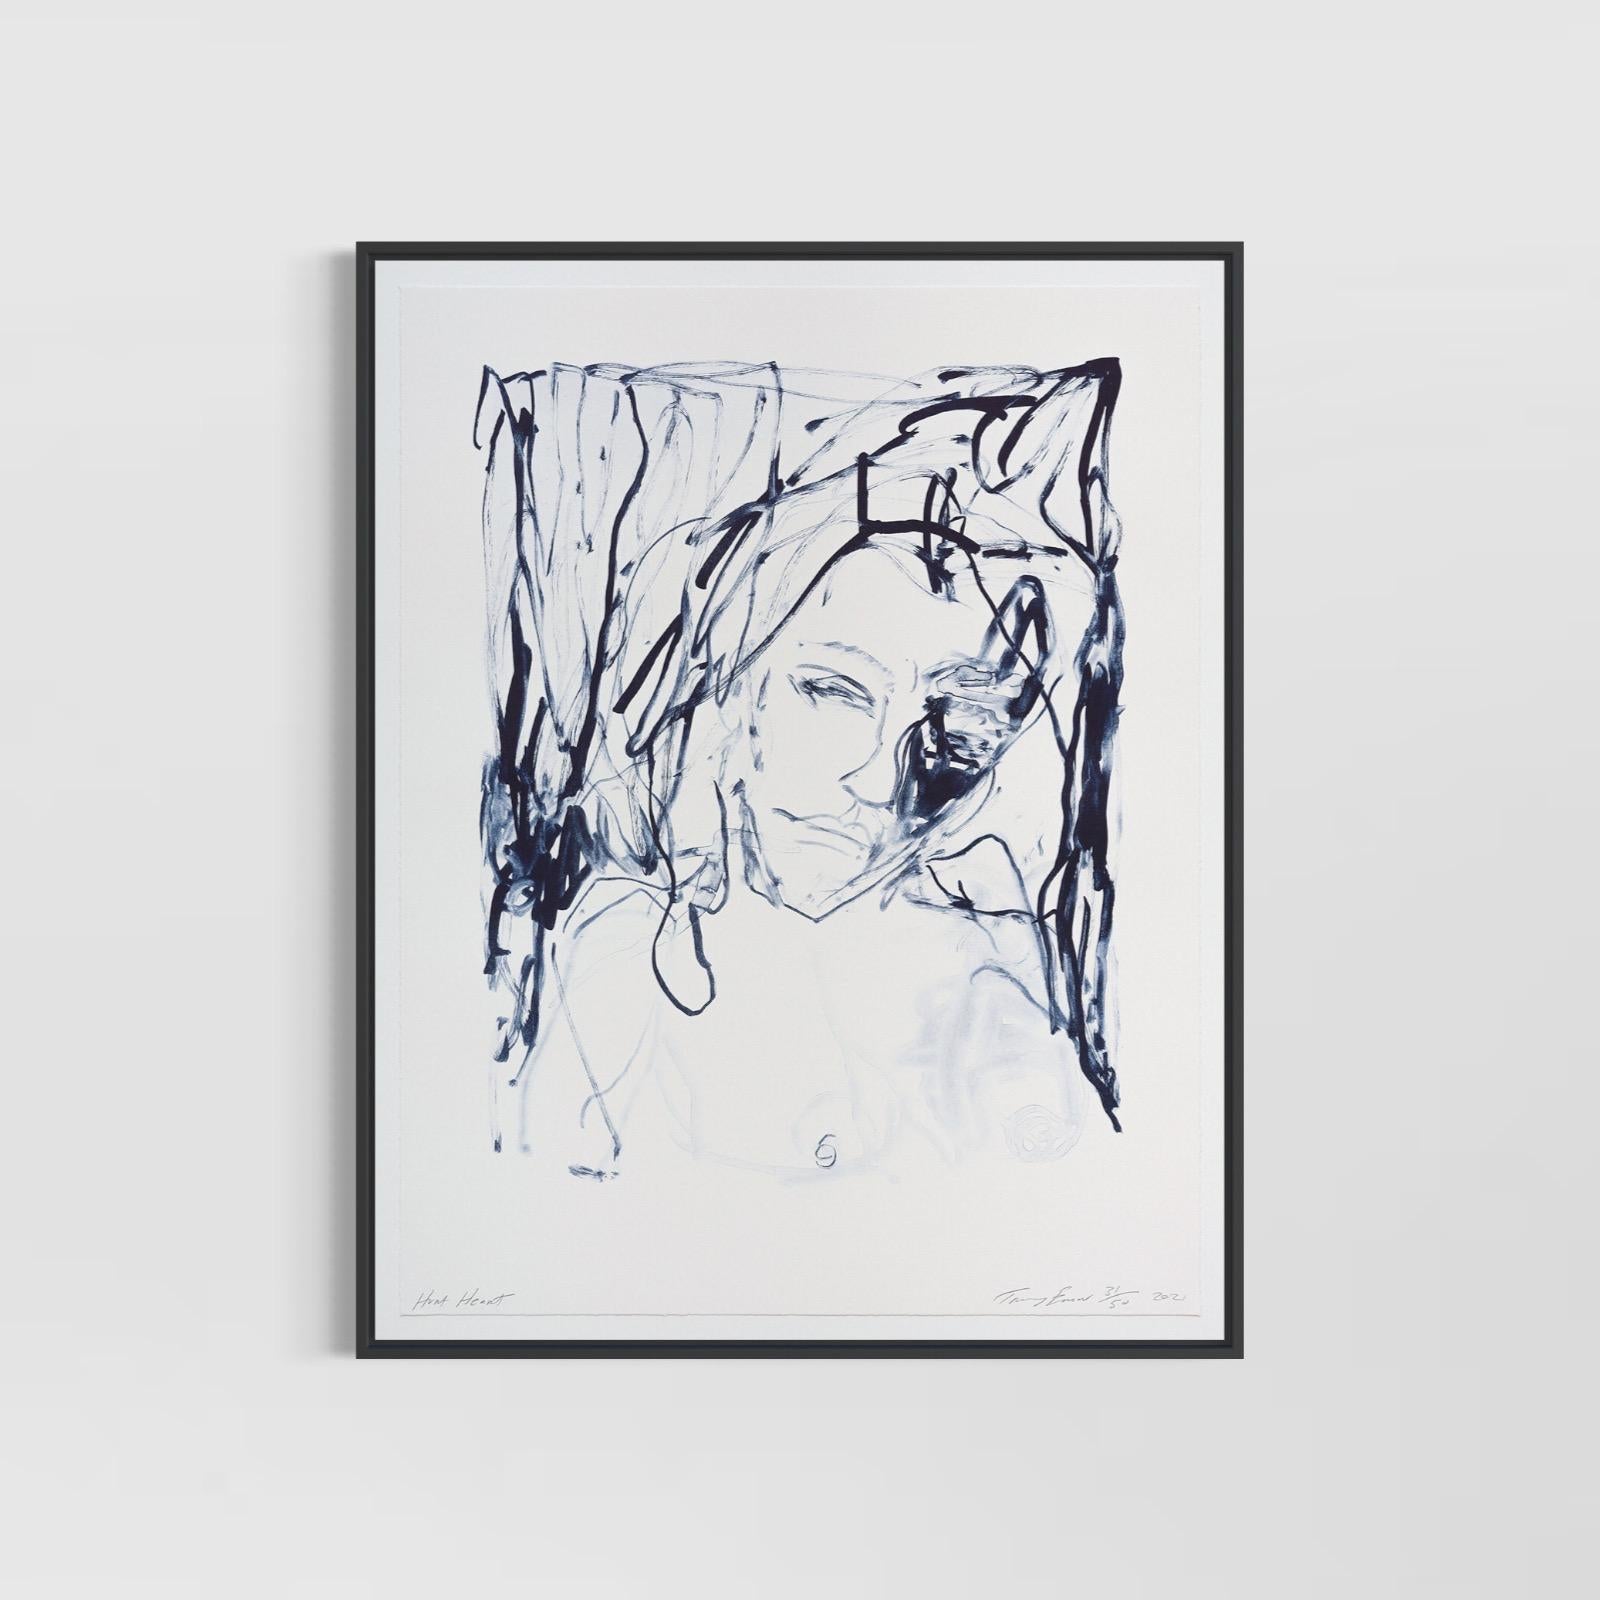 Hurt Heart (from A Journey to Death) - Emin, Contemporary, YBAs, Lithograph - Print by Tracey Emin